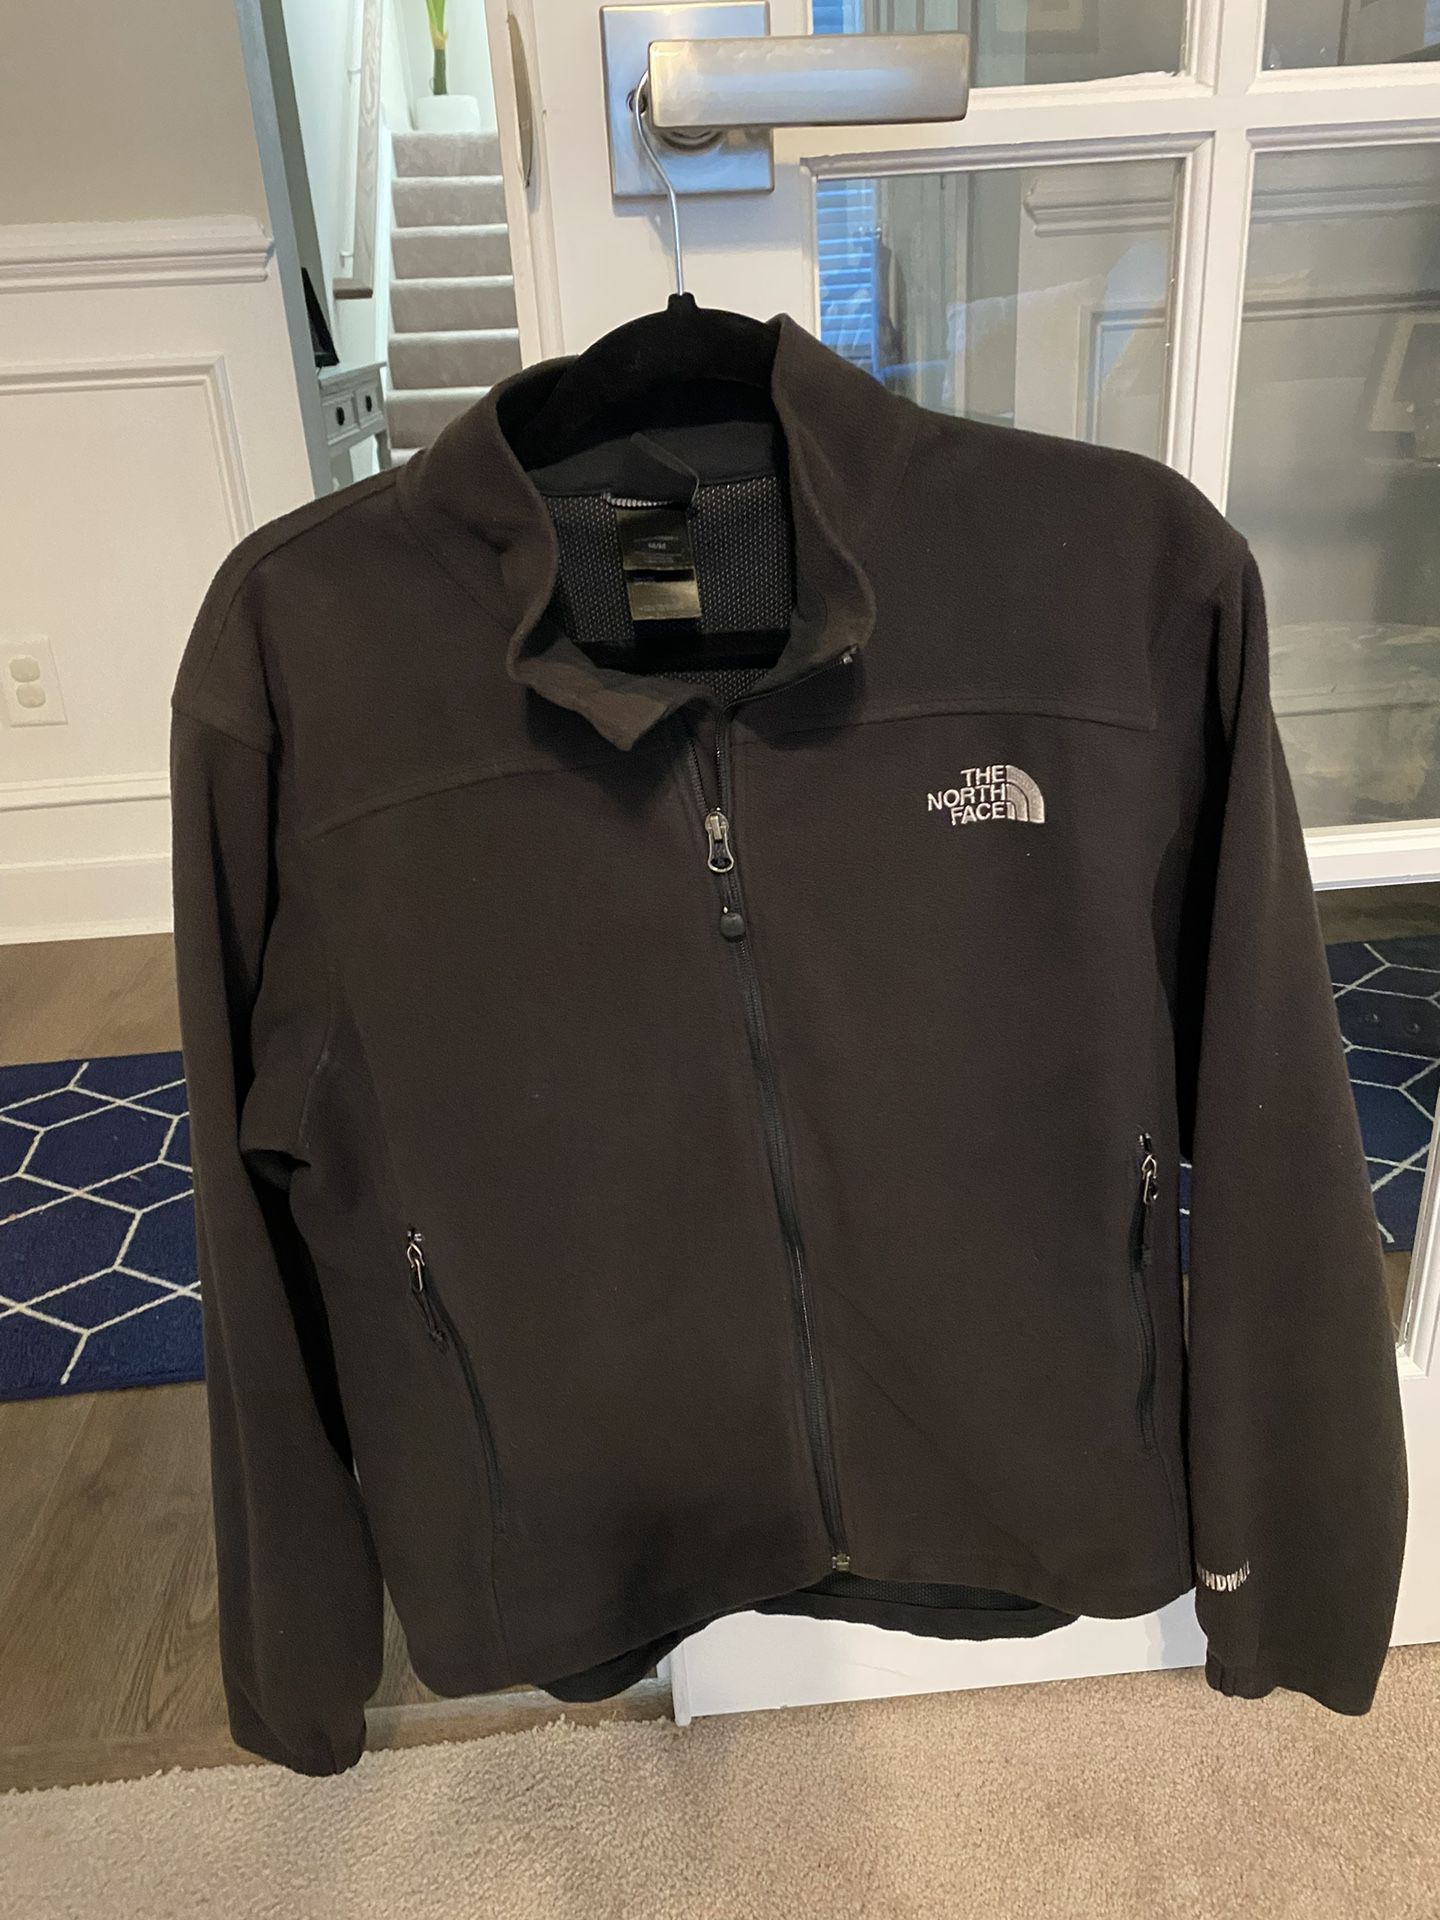 The North Face Men’s Jacket